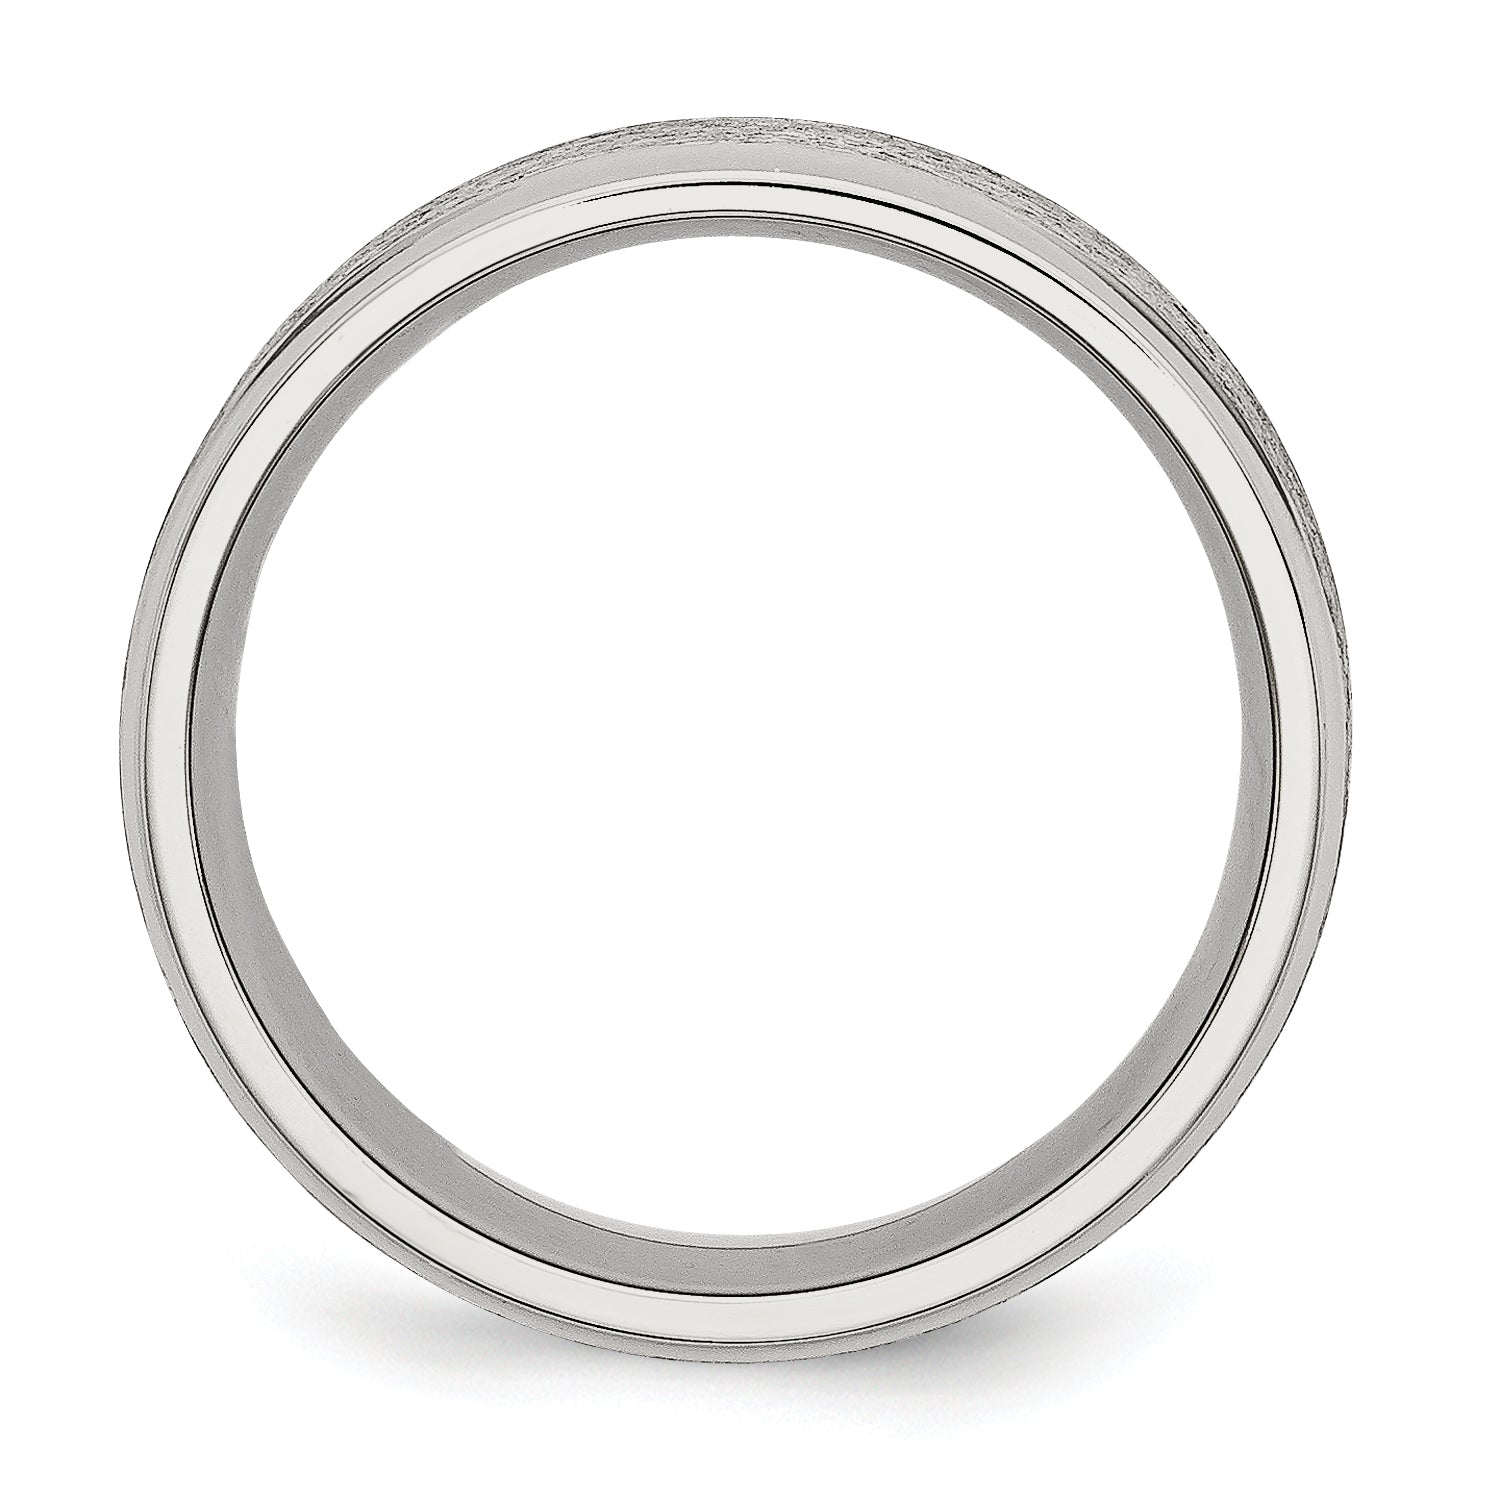 Stainless Steel Polished with Grain Finish Center 8mm Ridged Edge Band